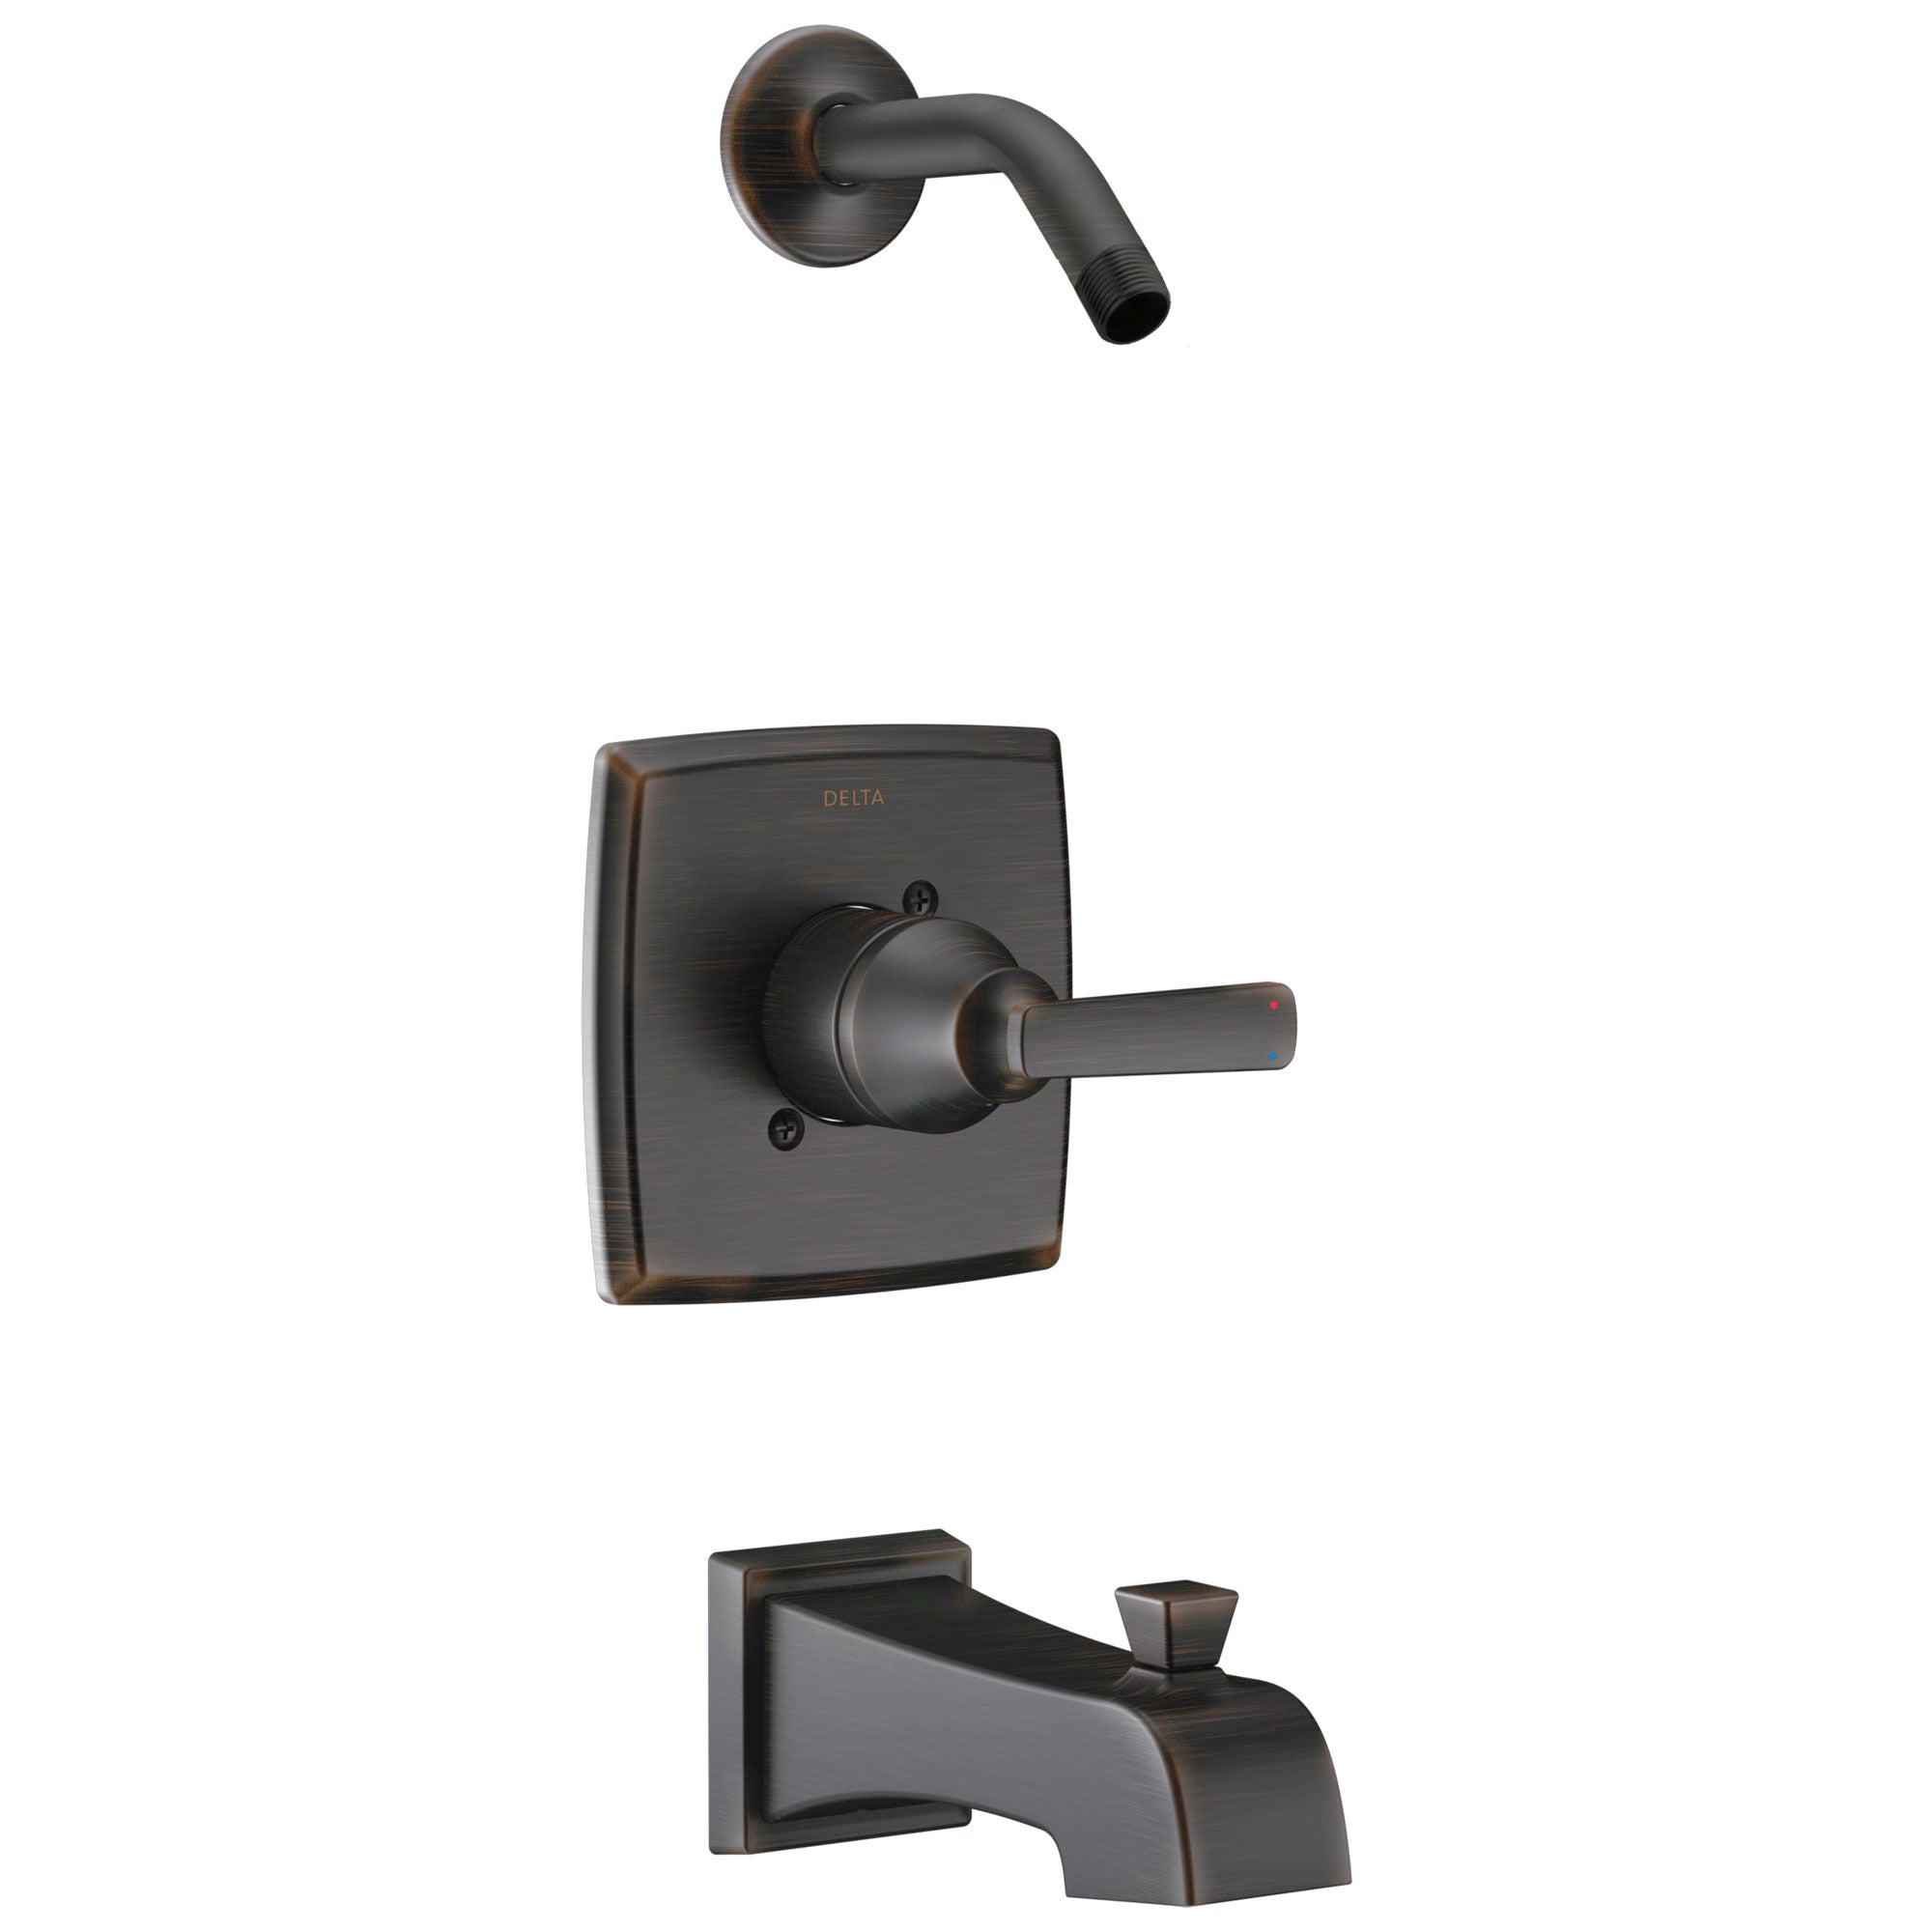 Delta Ashlyn Collection Venetian Bronze Monitor 14 Stylish Tub & Shower Combination Faucet Trim - Less Showerhead (Valve Sold Separately) DT14464RBLHD